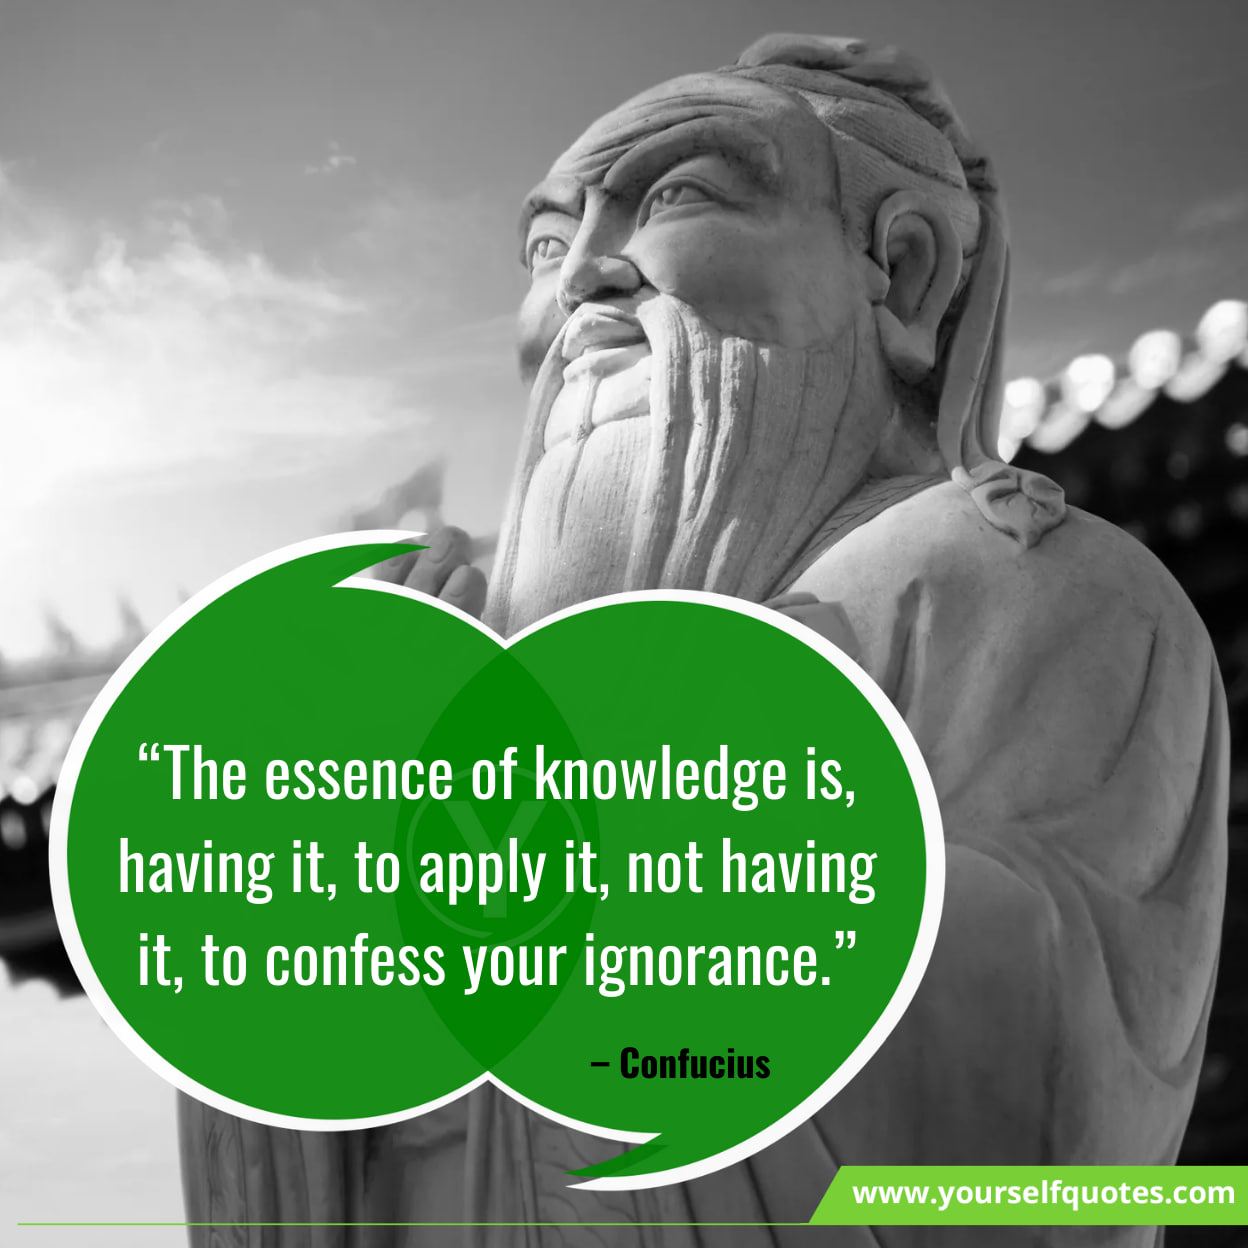 Inspirational Quotes On Knowledge